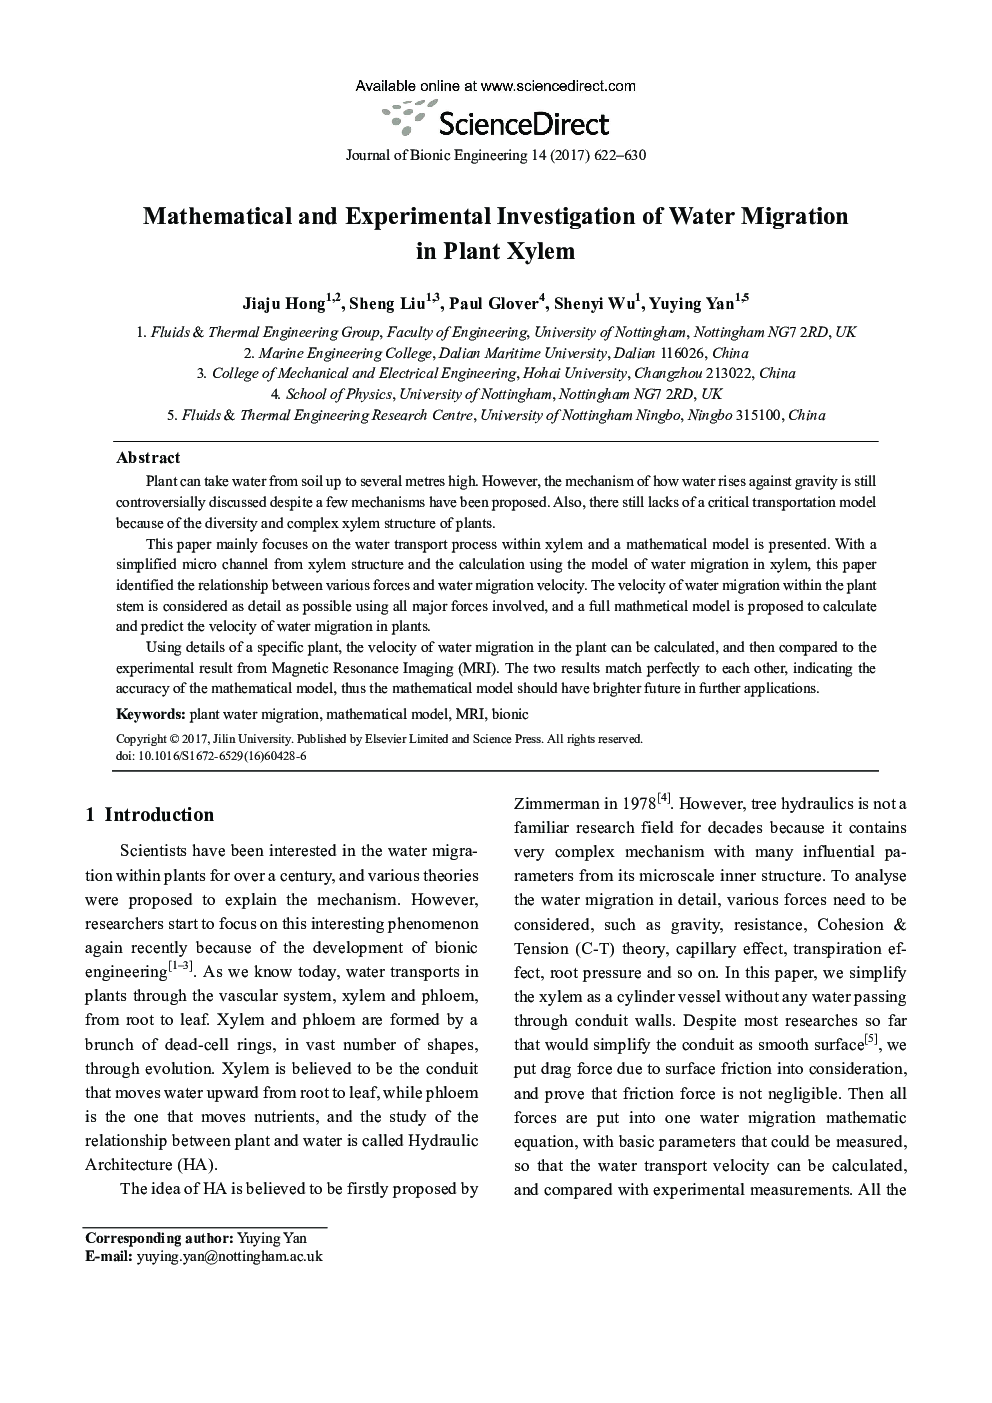 Mathematical and Experimental Investigation of Water Migration in Plant Xylem